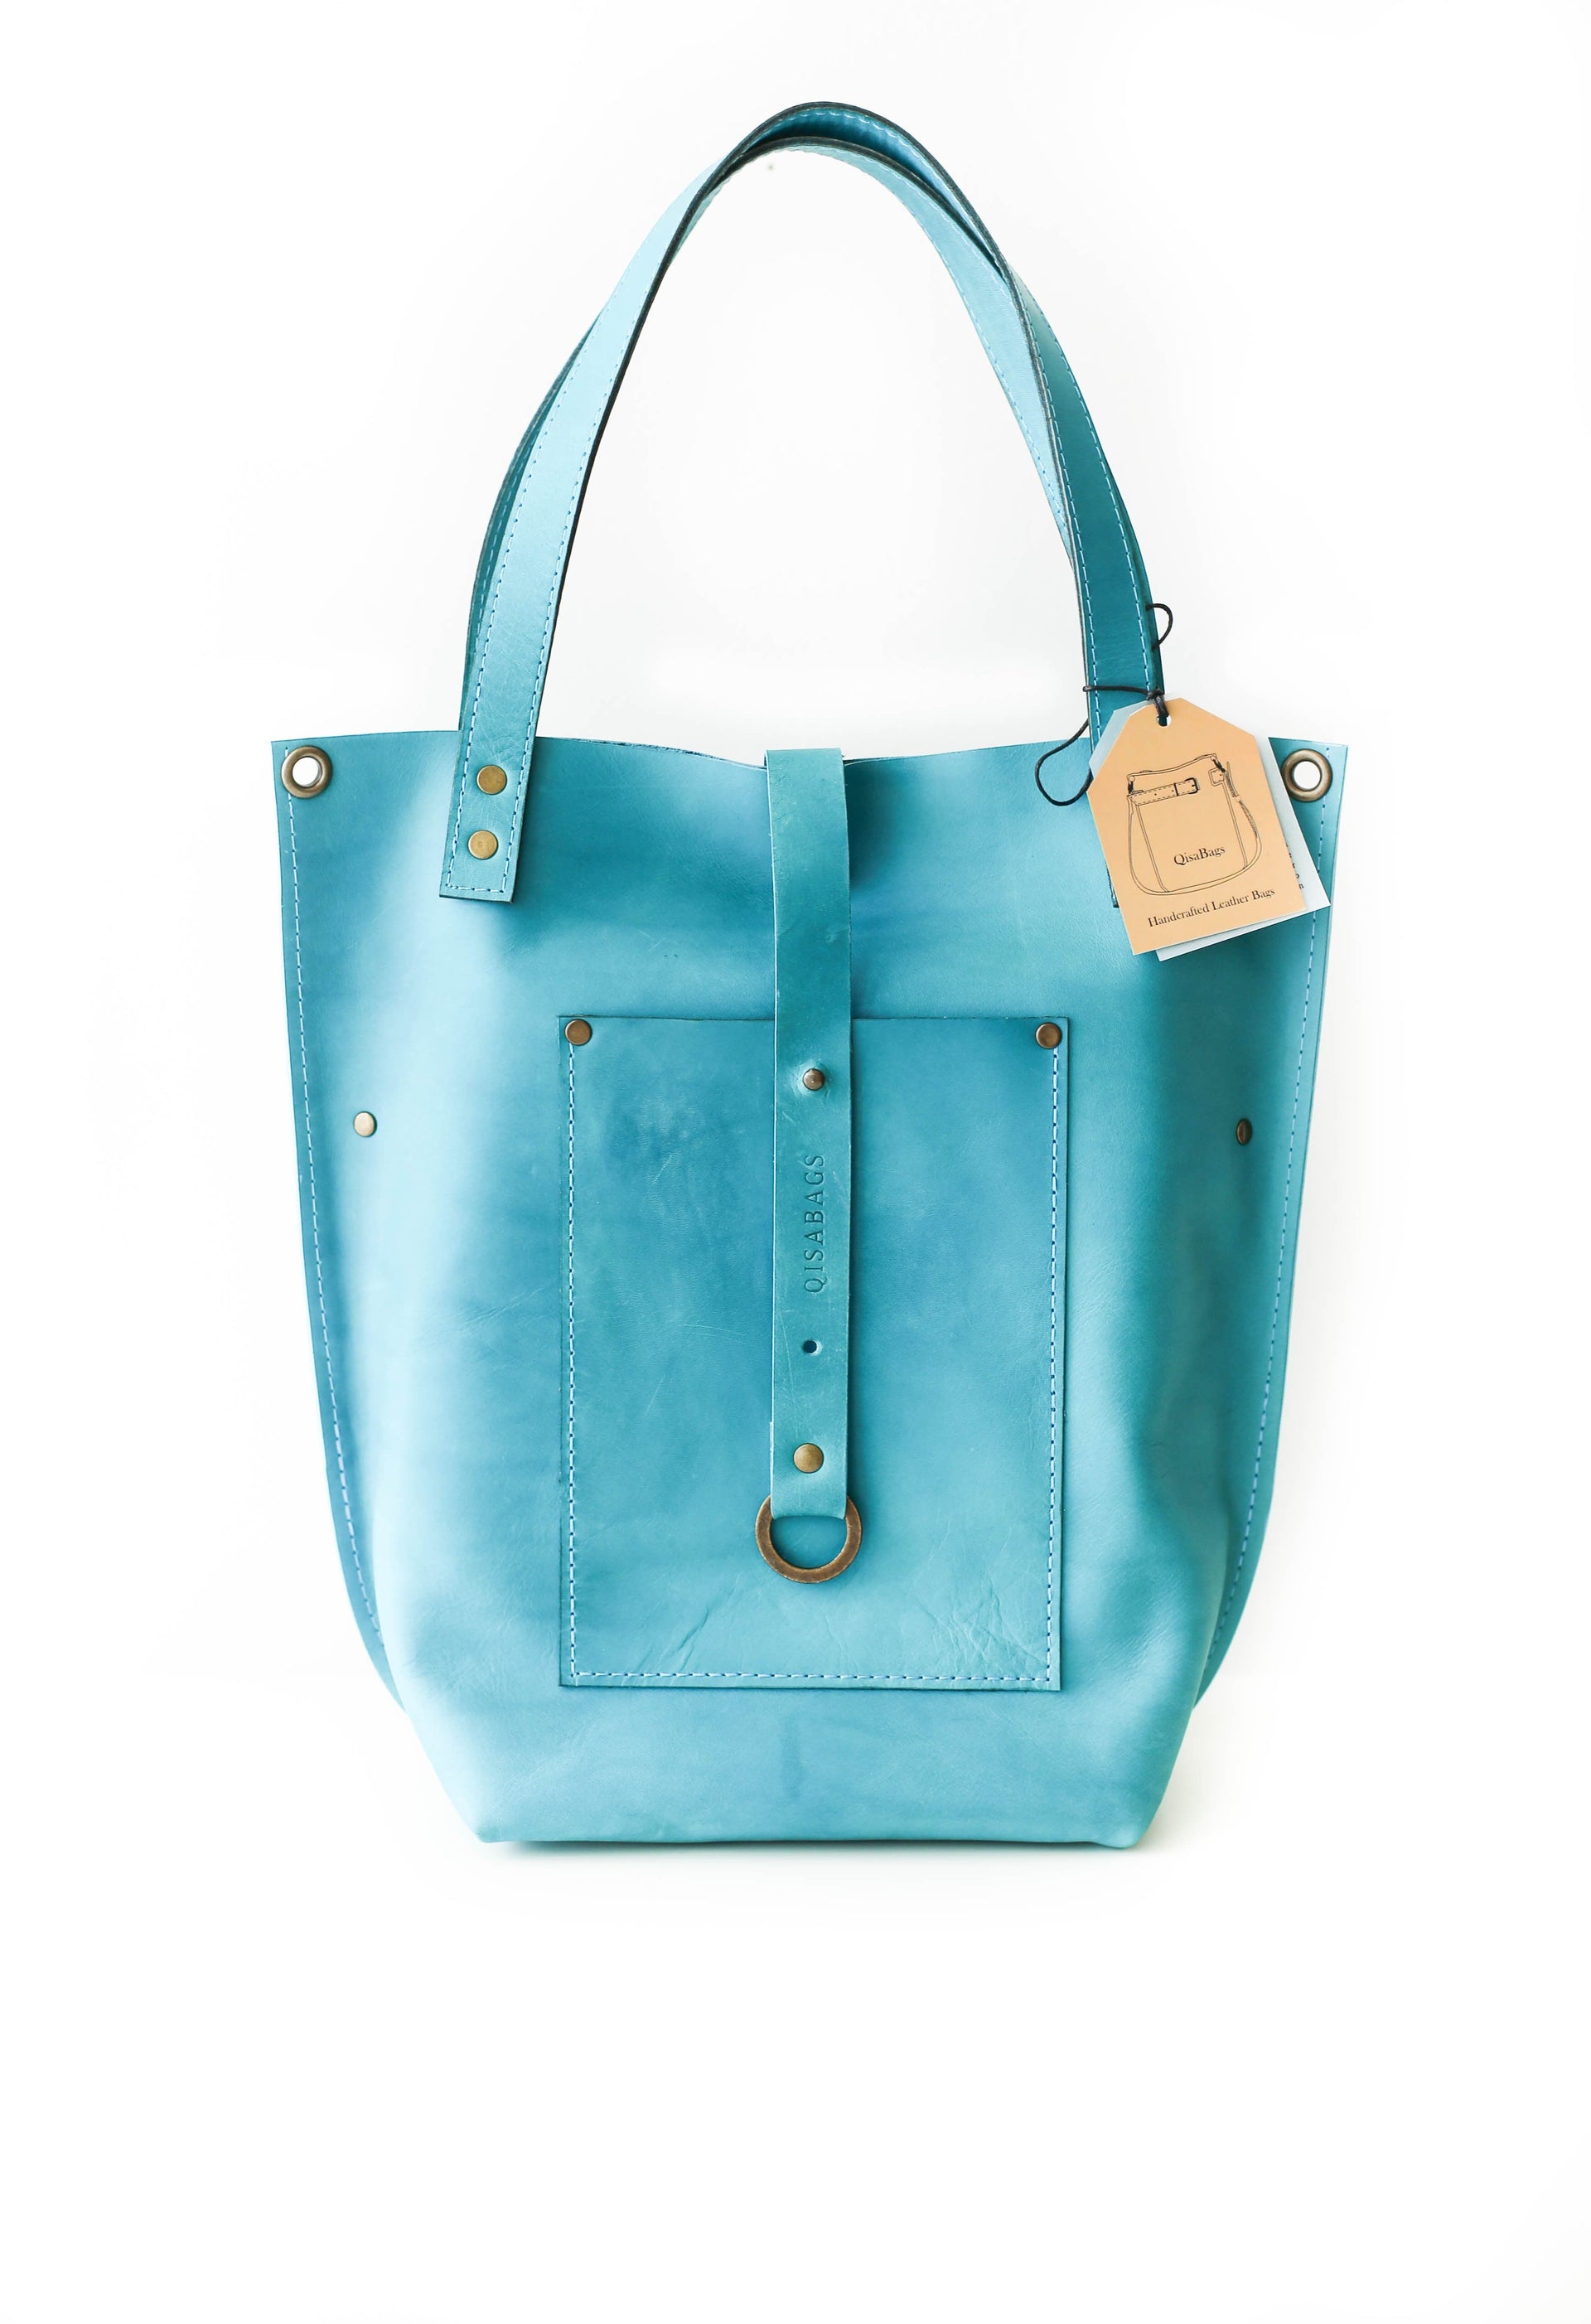 Blue leather tote